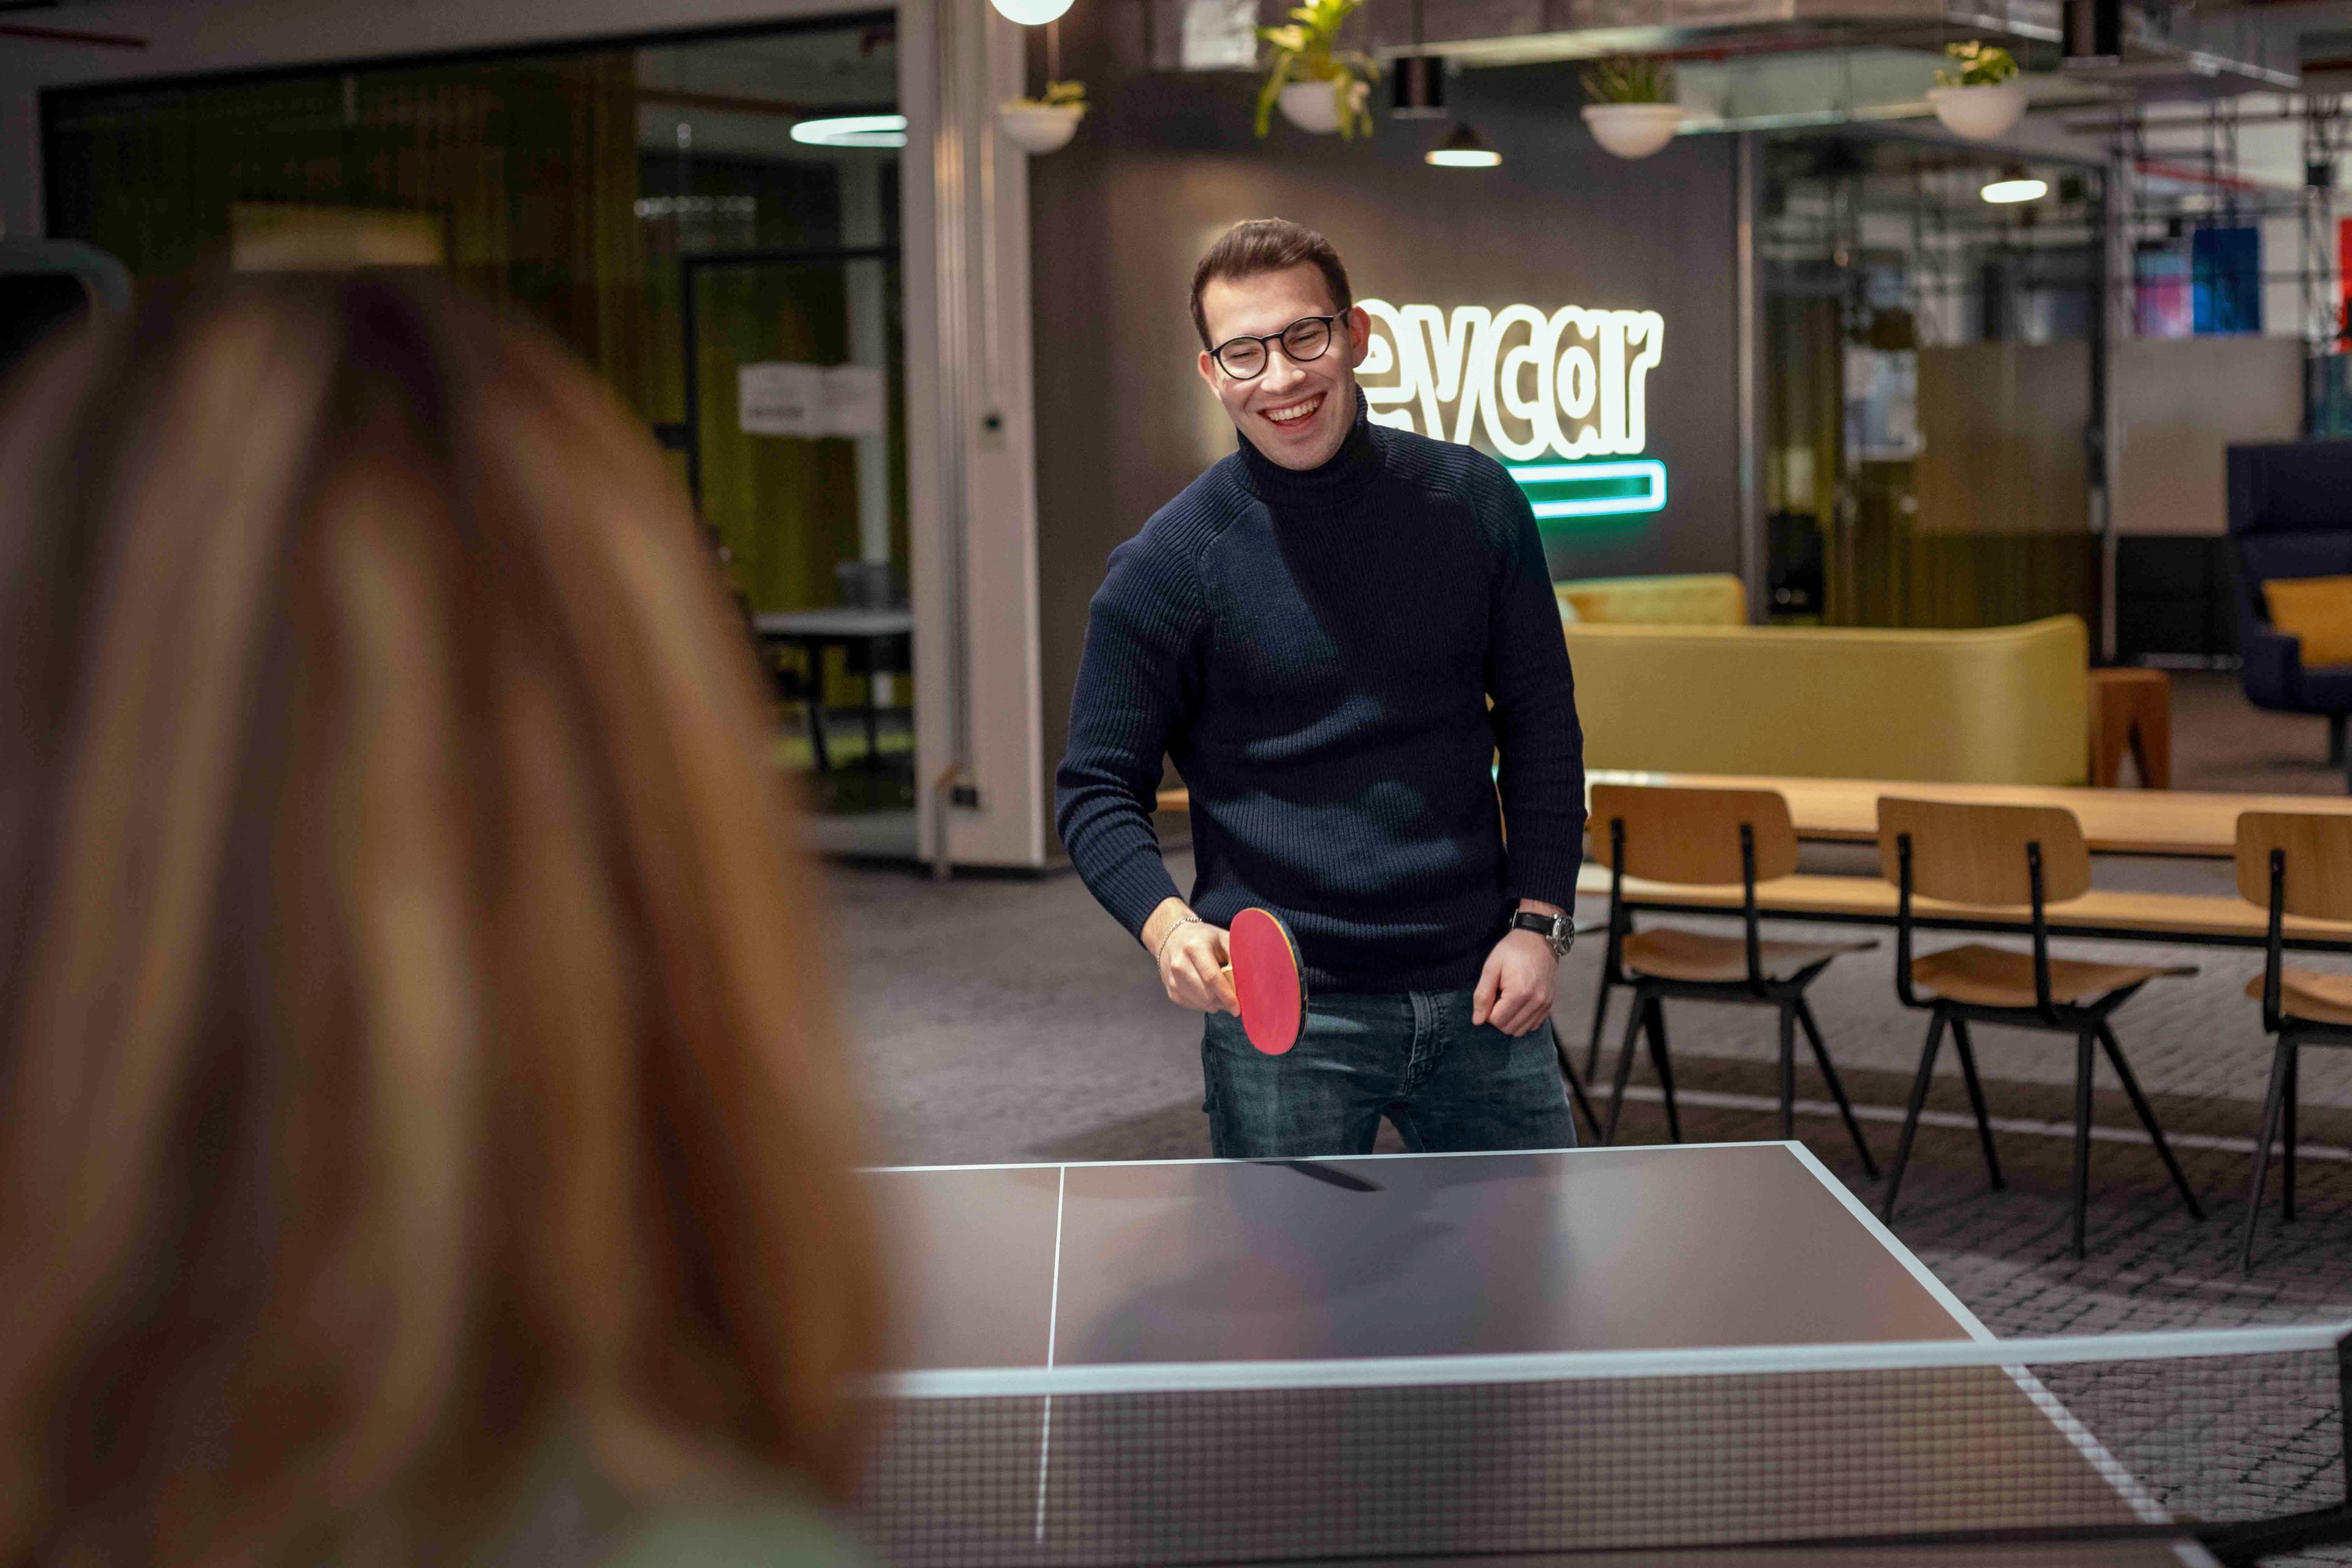 Playing table tennis in the office